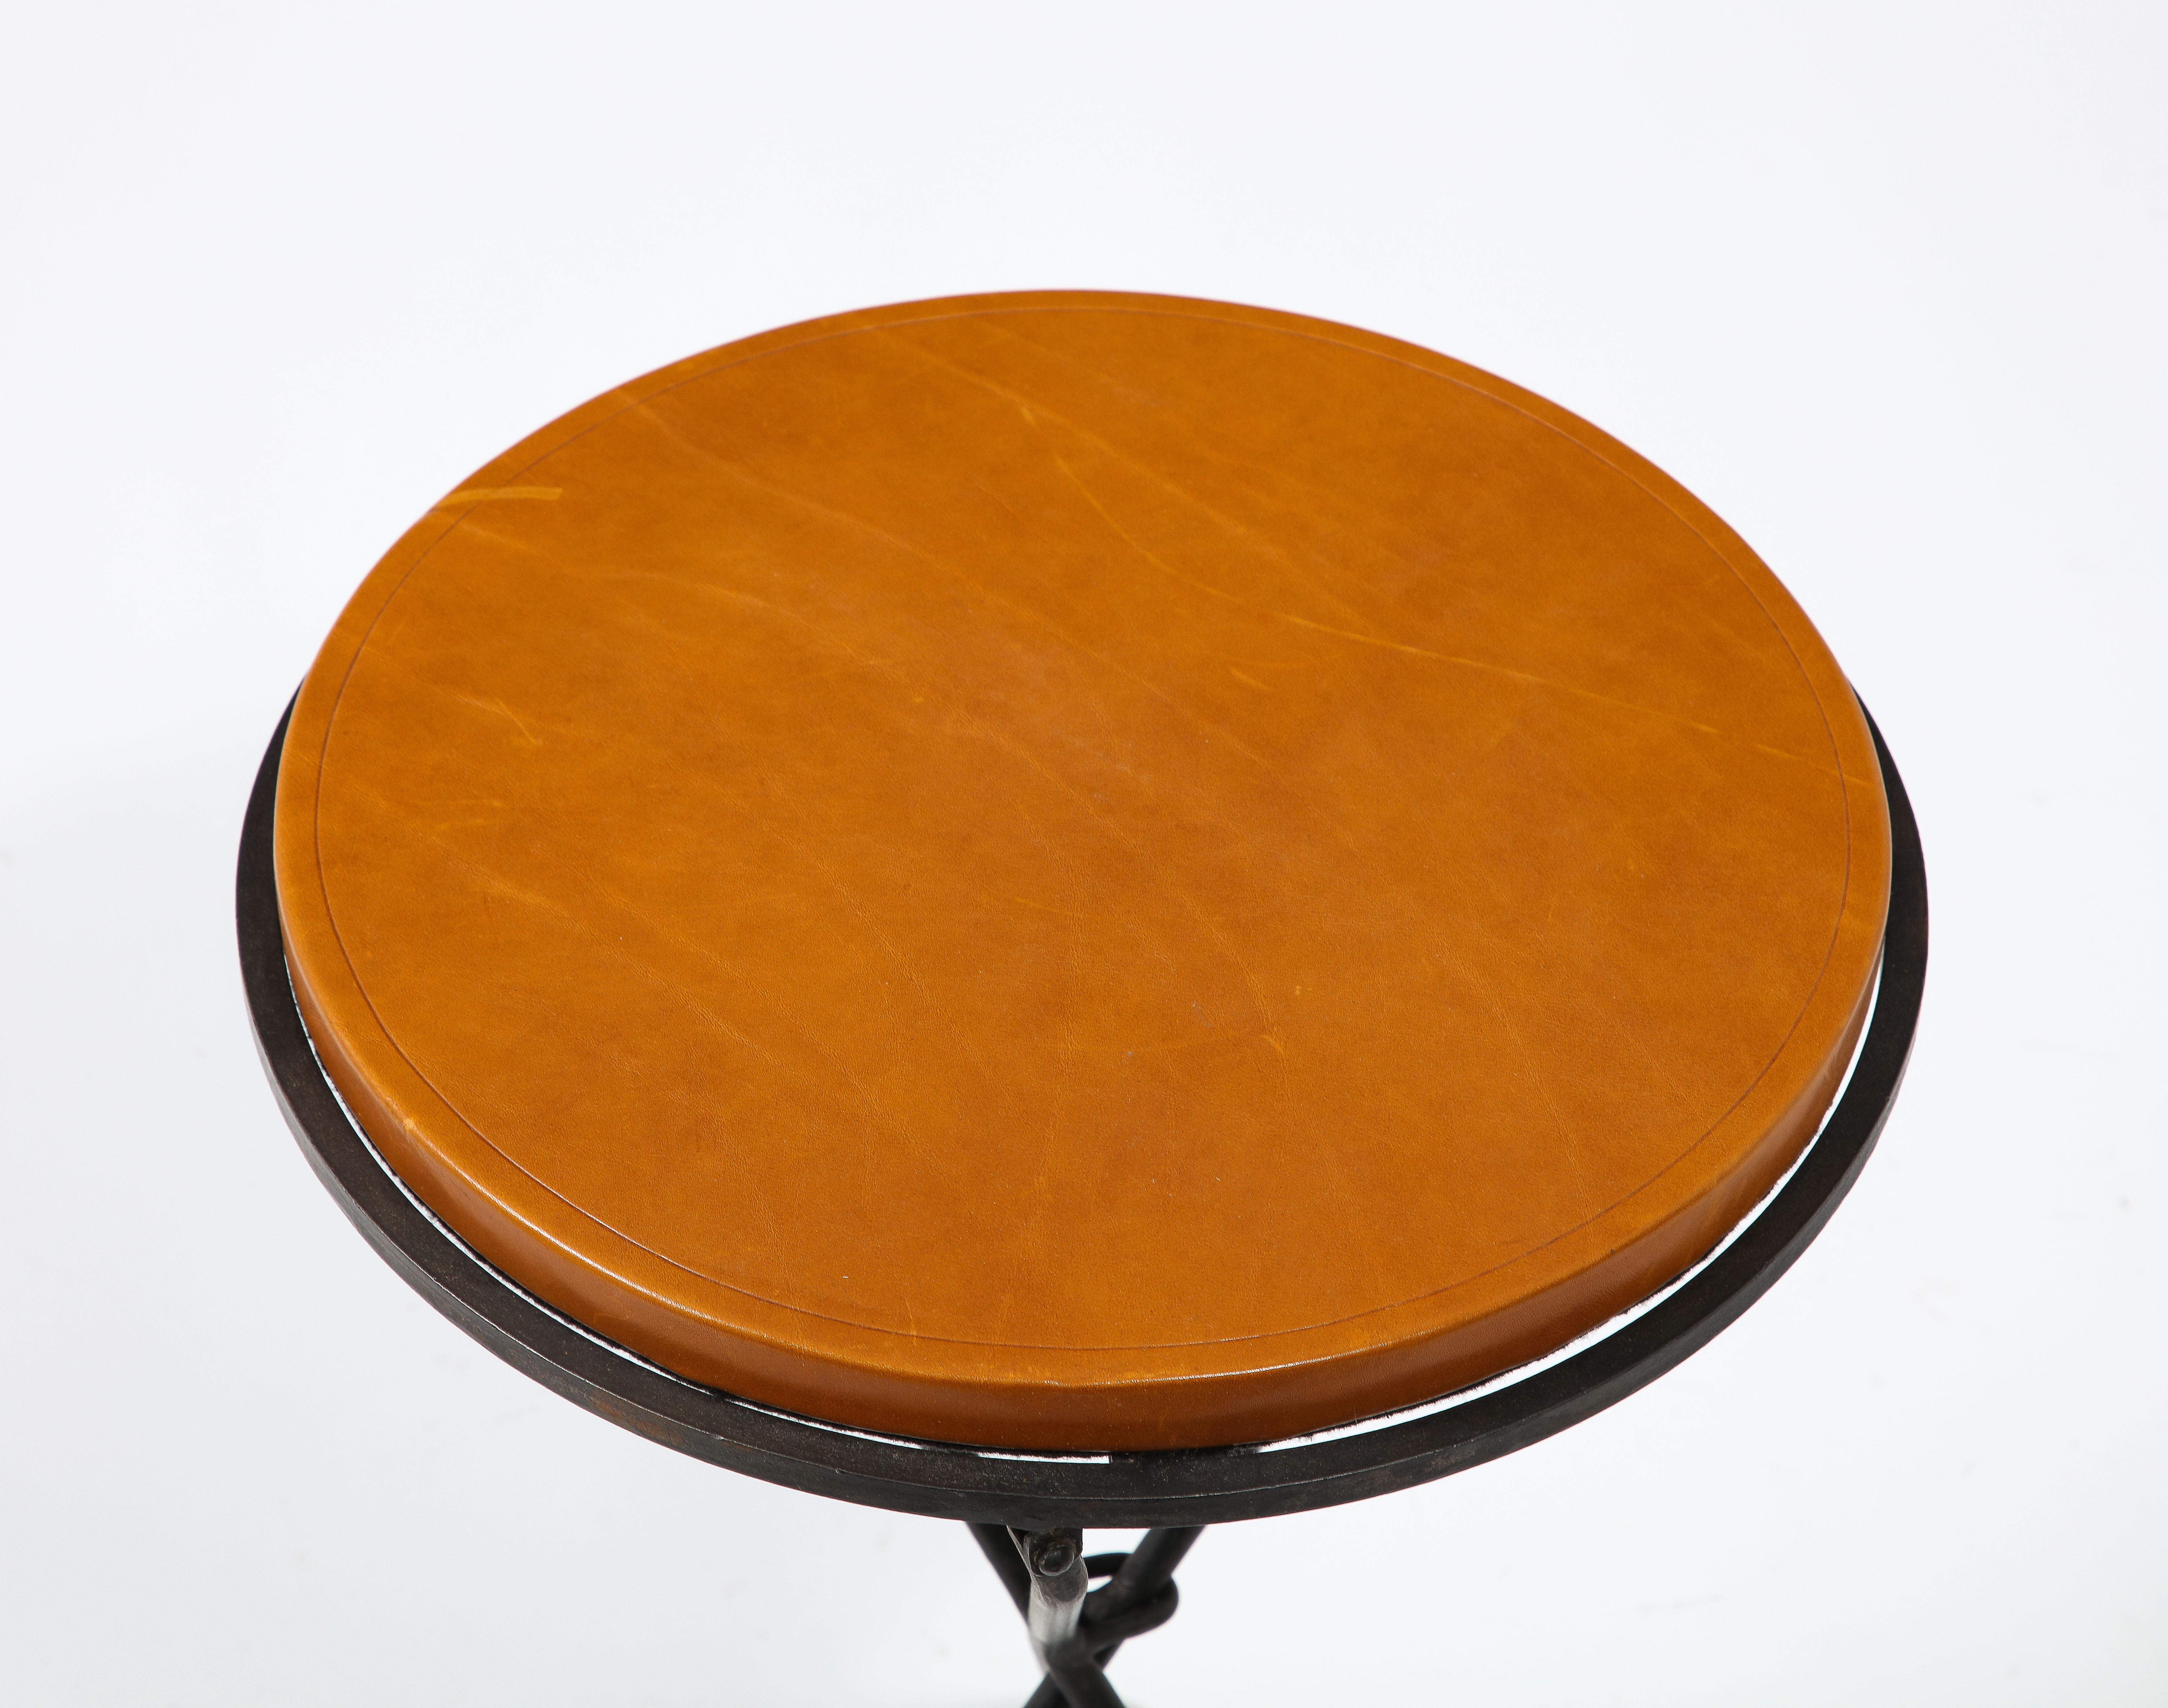 A folding wrought iron table with a leather top, the hanging ring is meant to be used to hang the table flat when not in use.